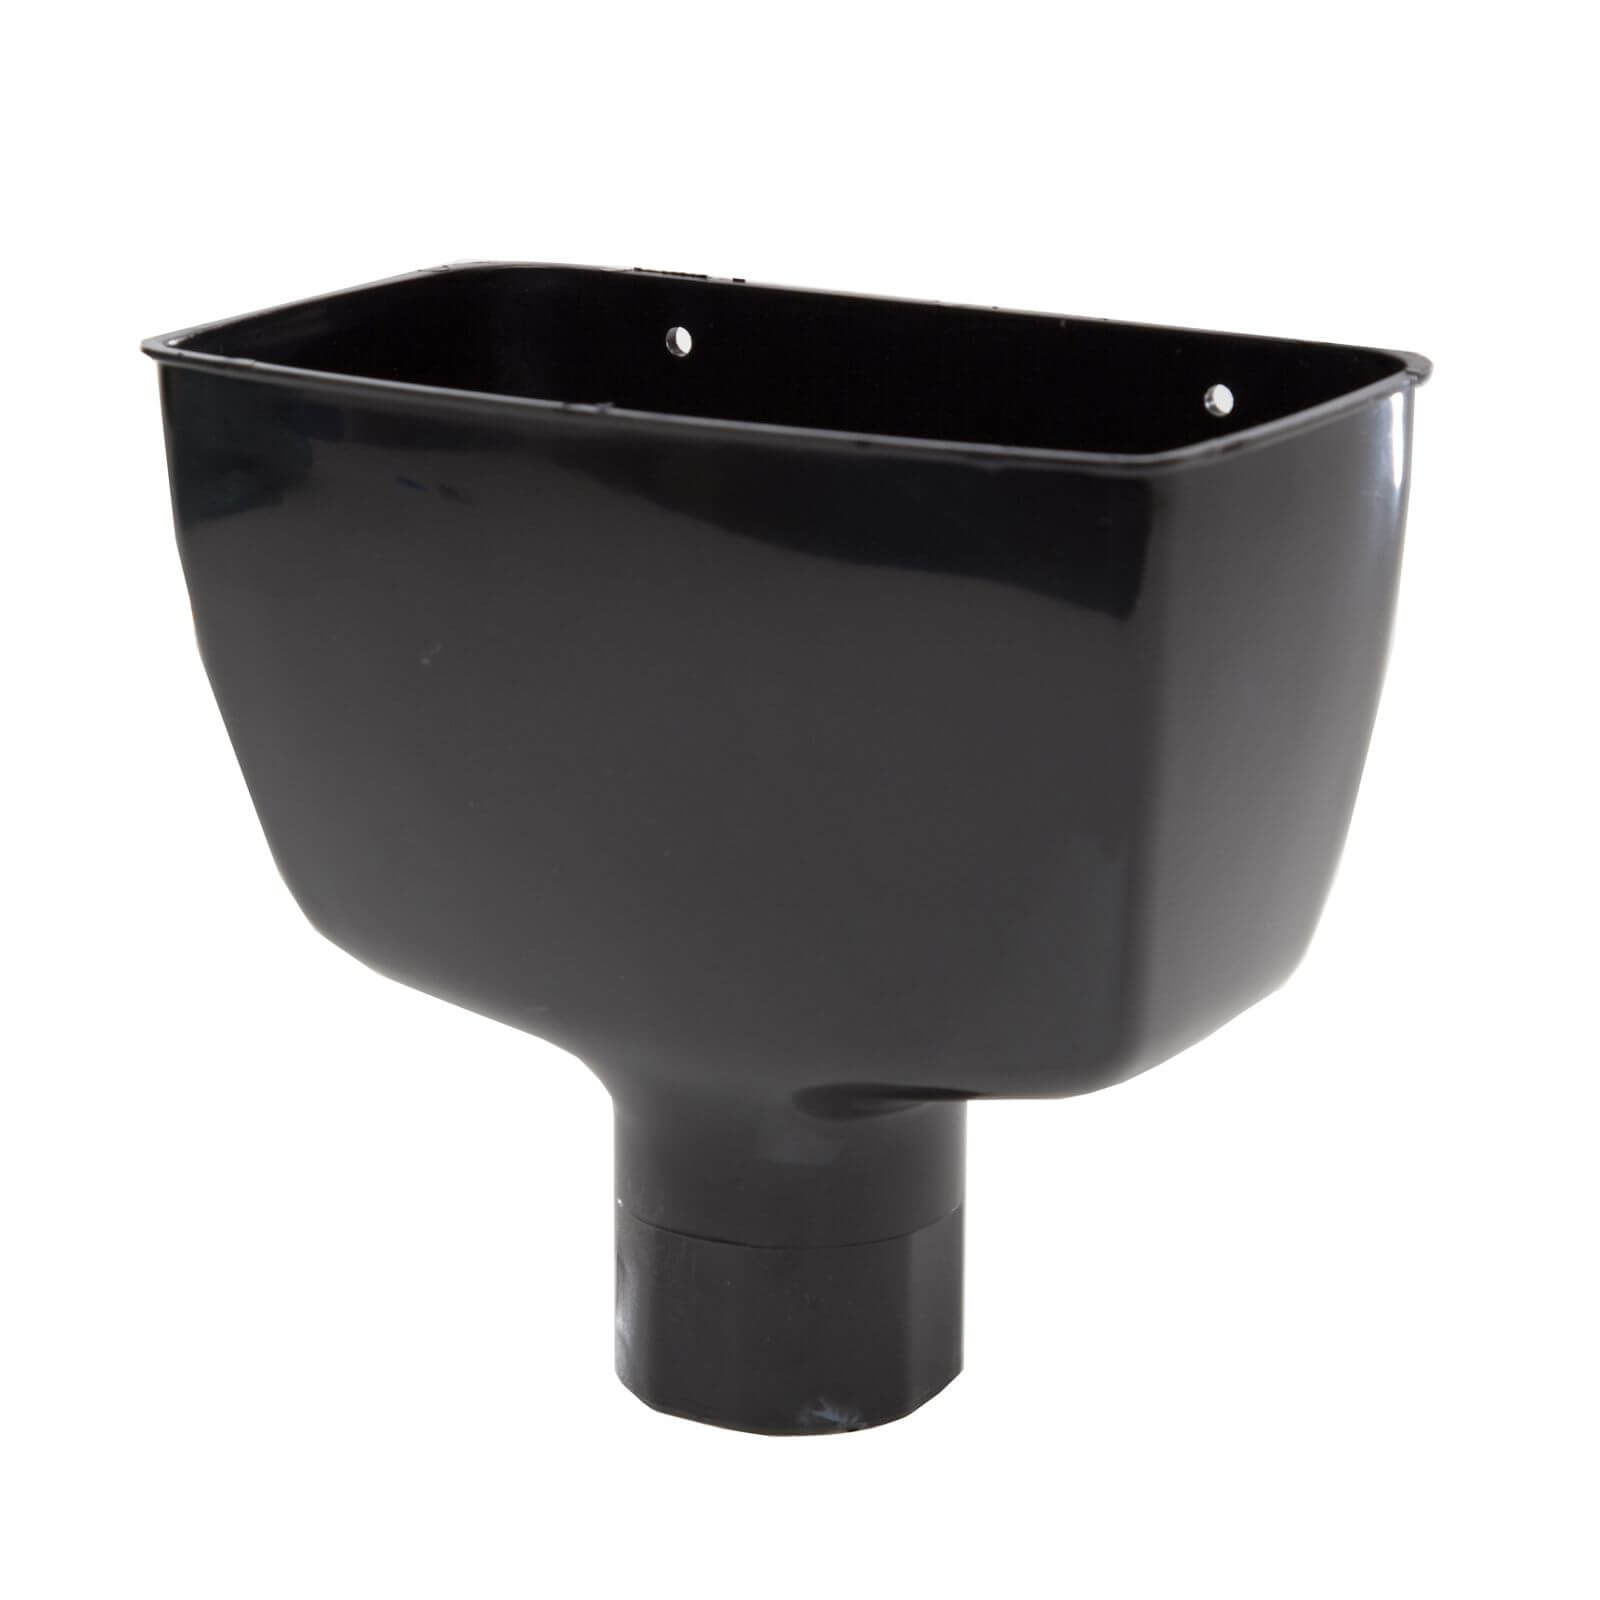 Photo of Polypipe Round Standard Hopper Head - 68mm - Black